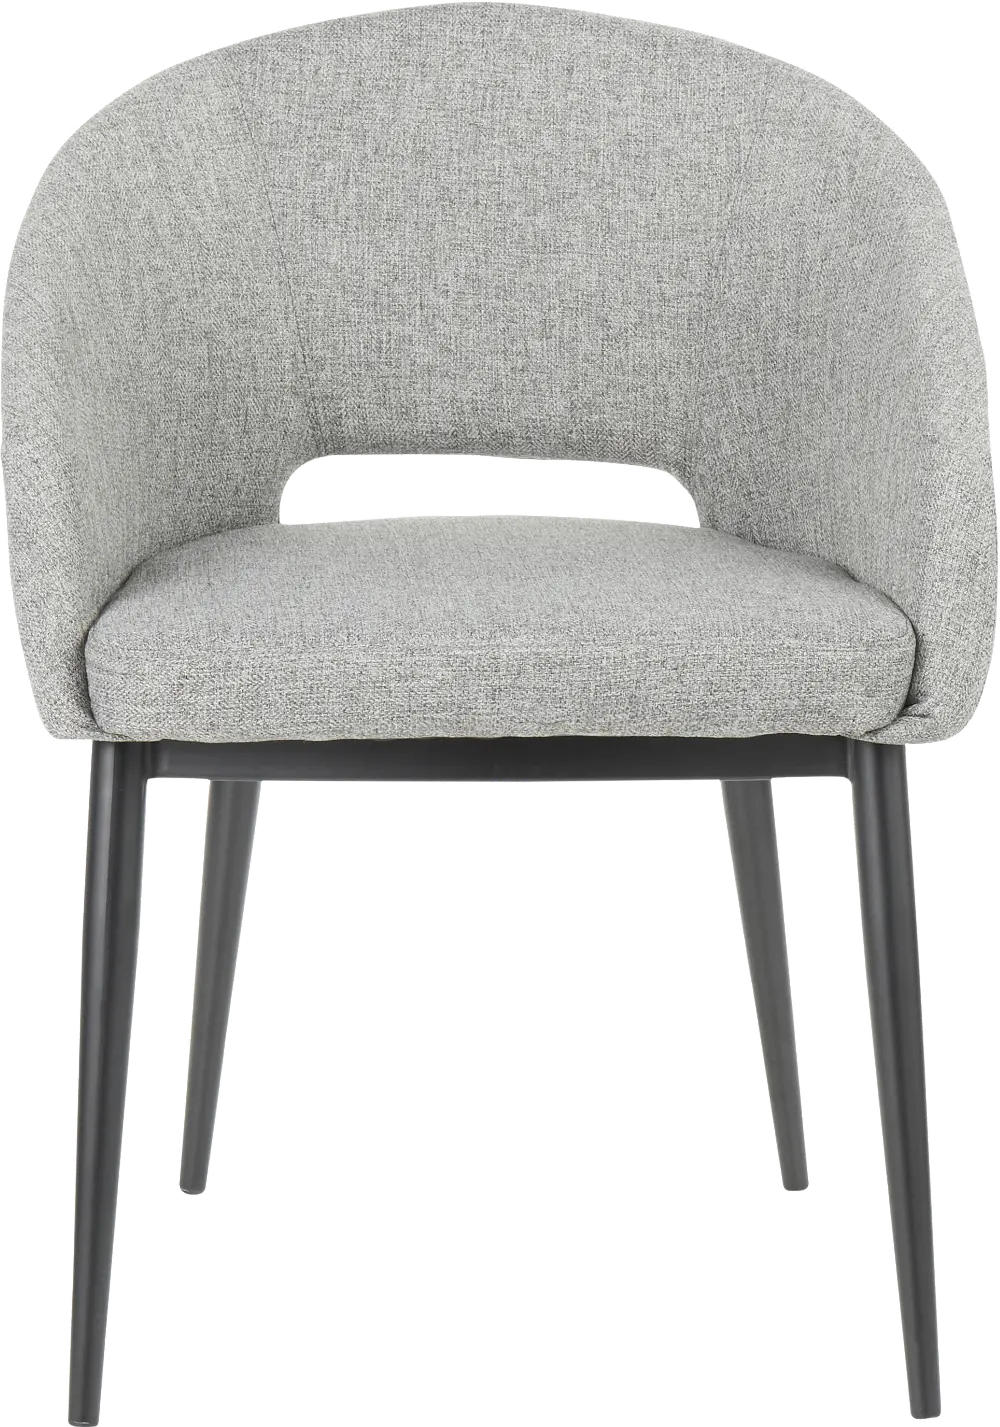 CH-RENEE-BKGY Contemporary Gray and Black Upholstered Dining Room Chair - Renee-1